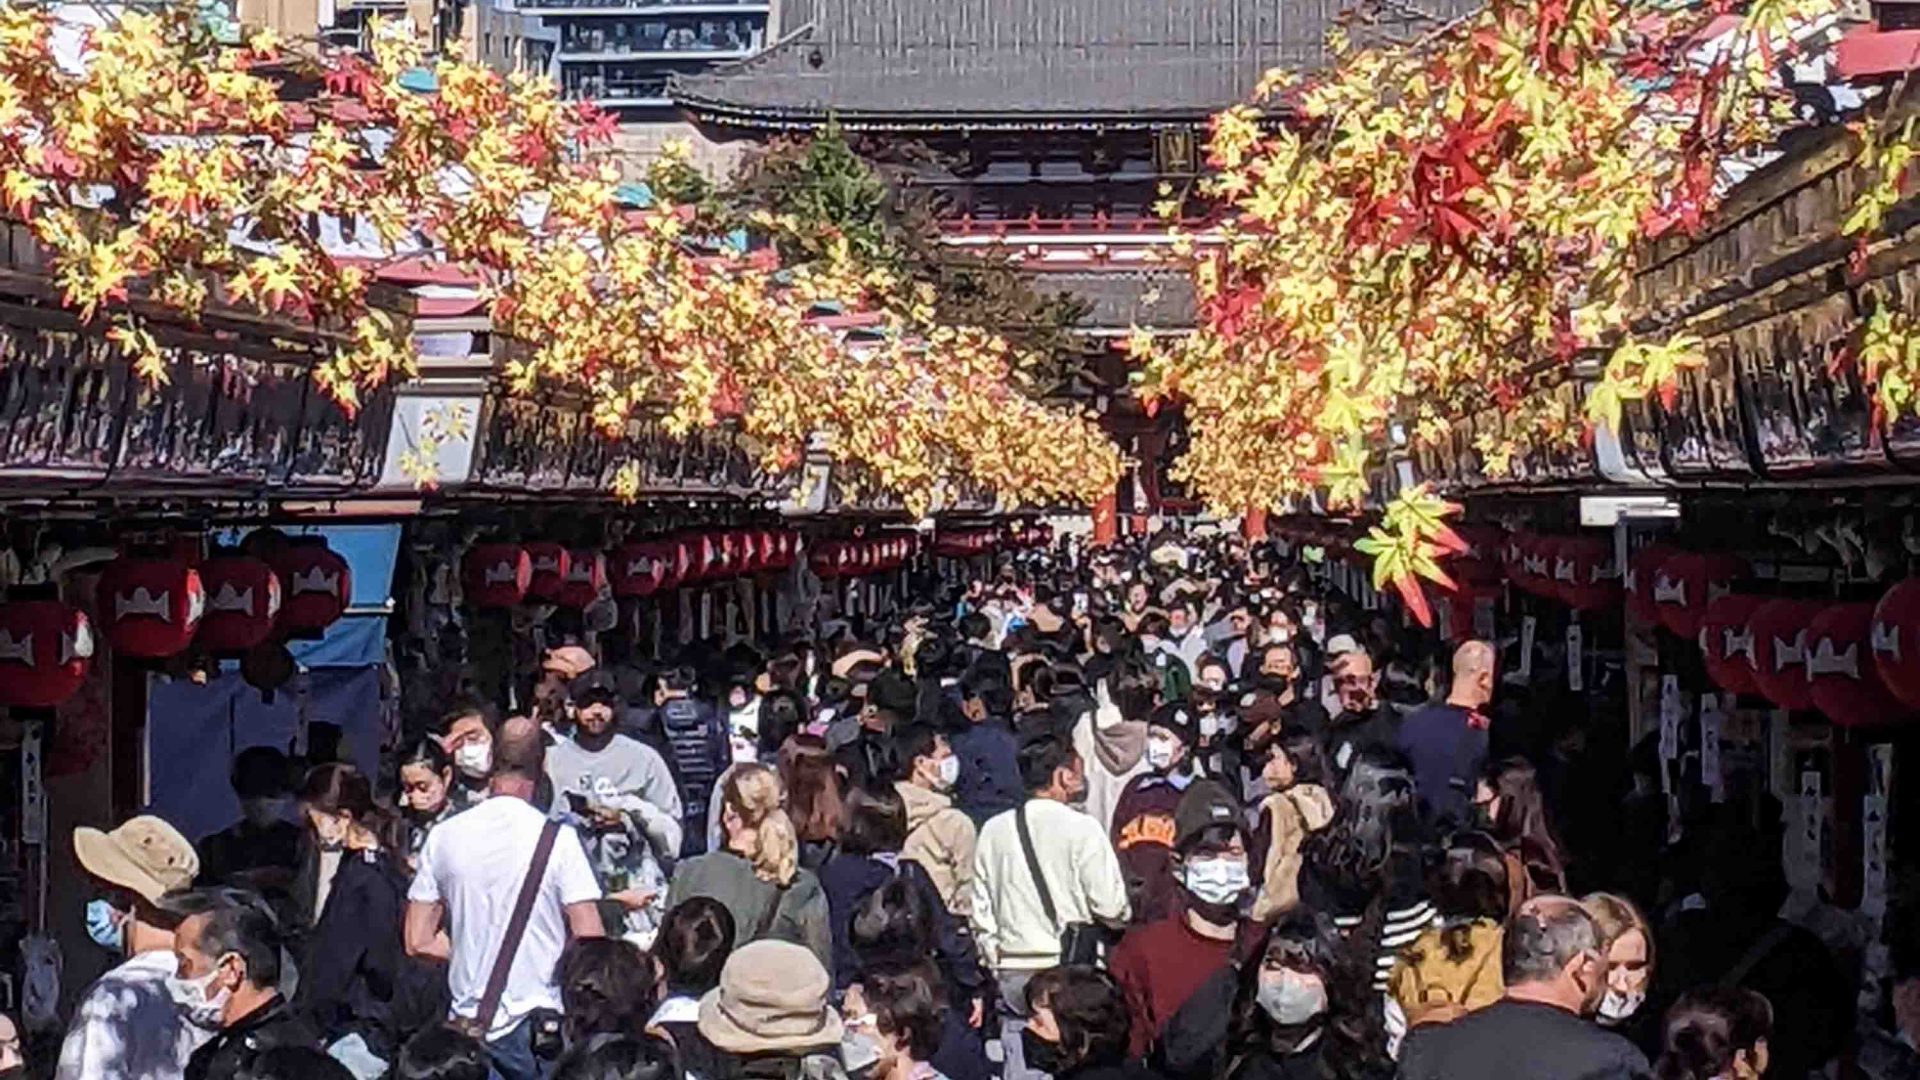 Every inch of space is taken up with people at Asakusa.